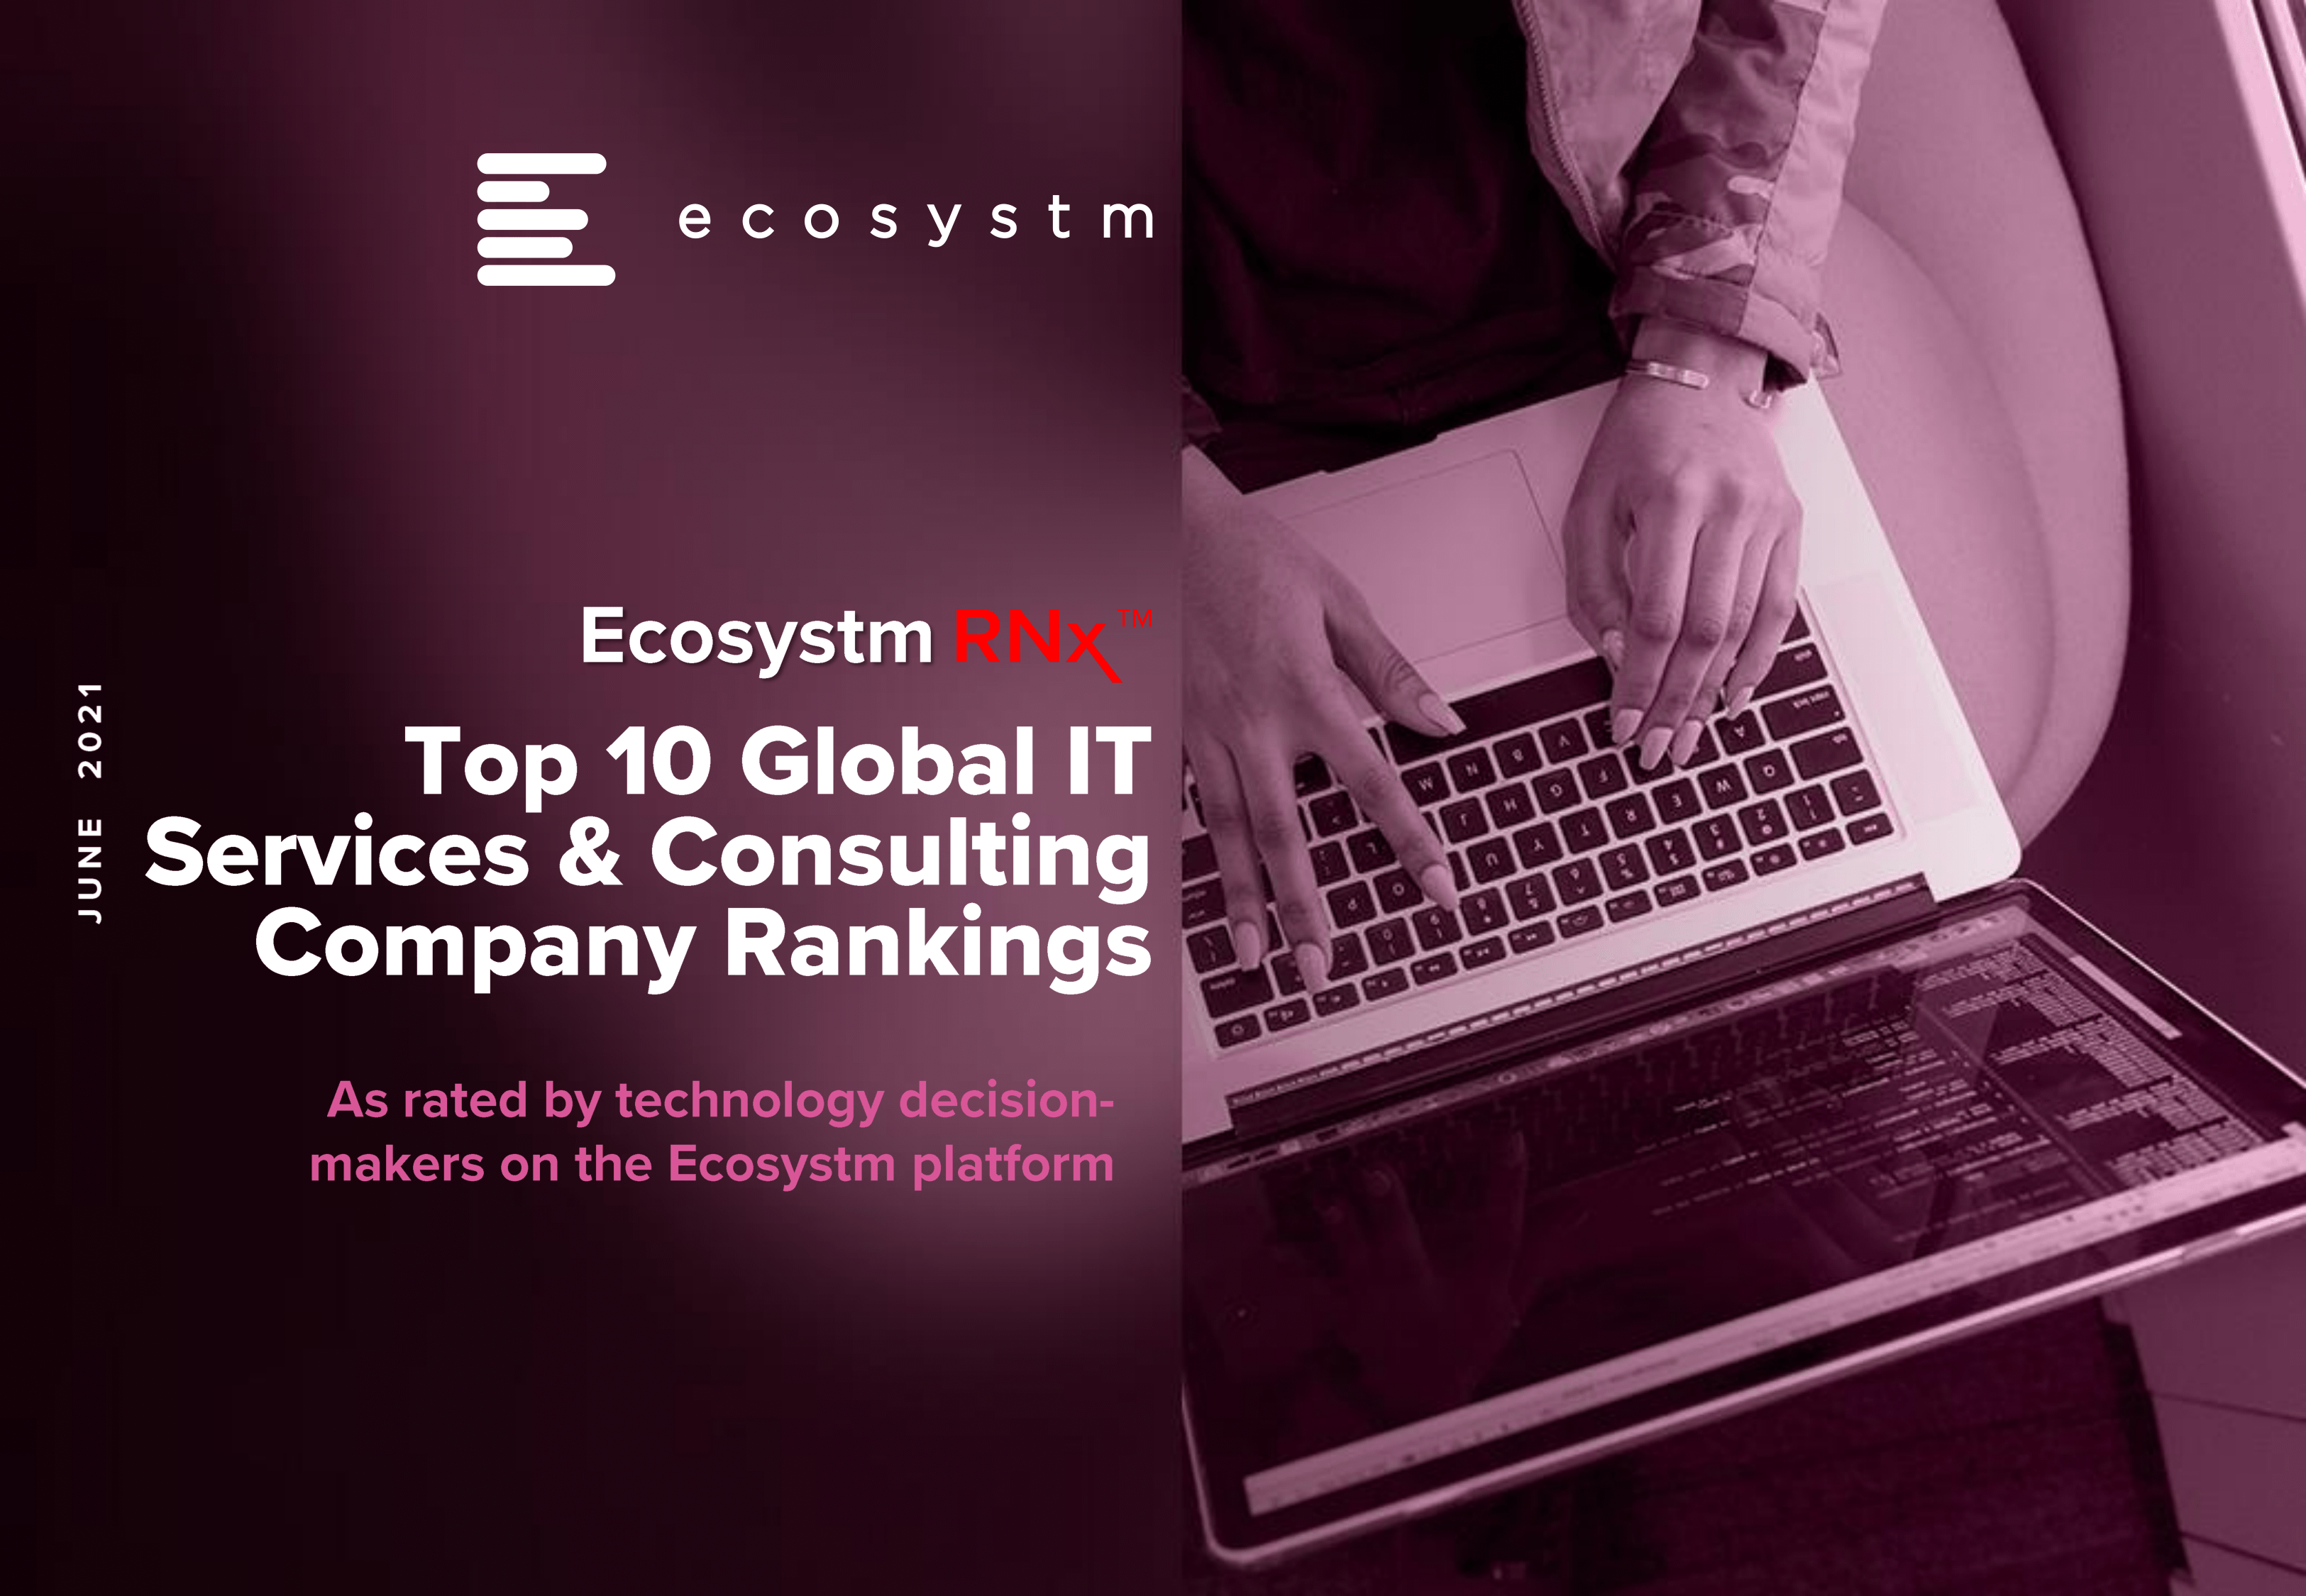 Top-10-IT-Services-and-Consulting-Company-Rankings-Ecosystm-RNx-1